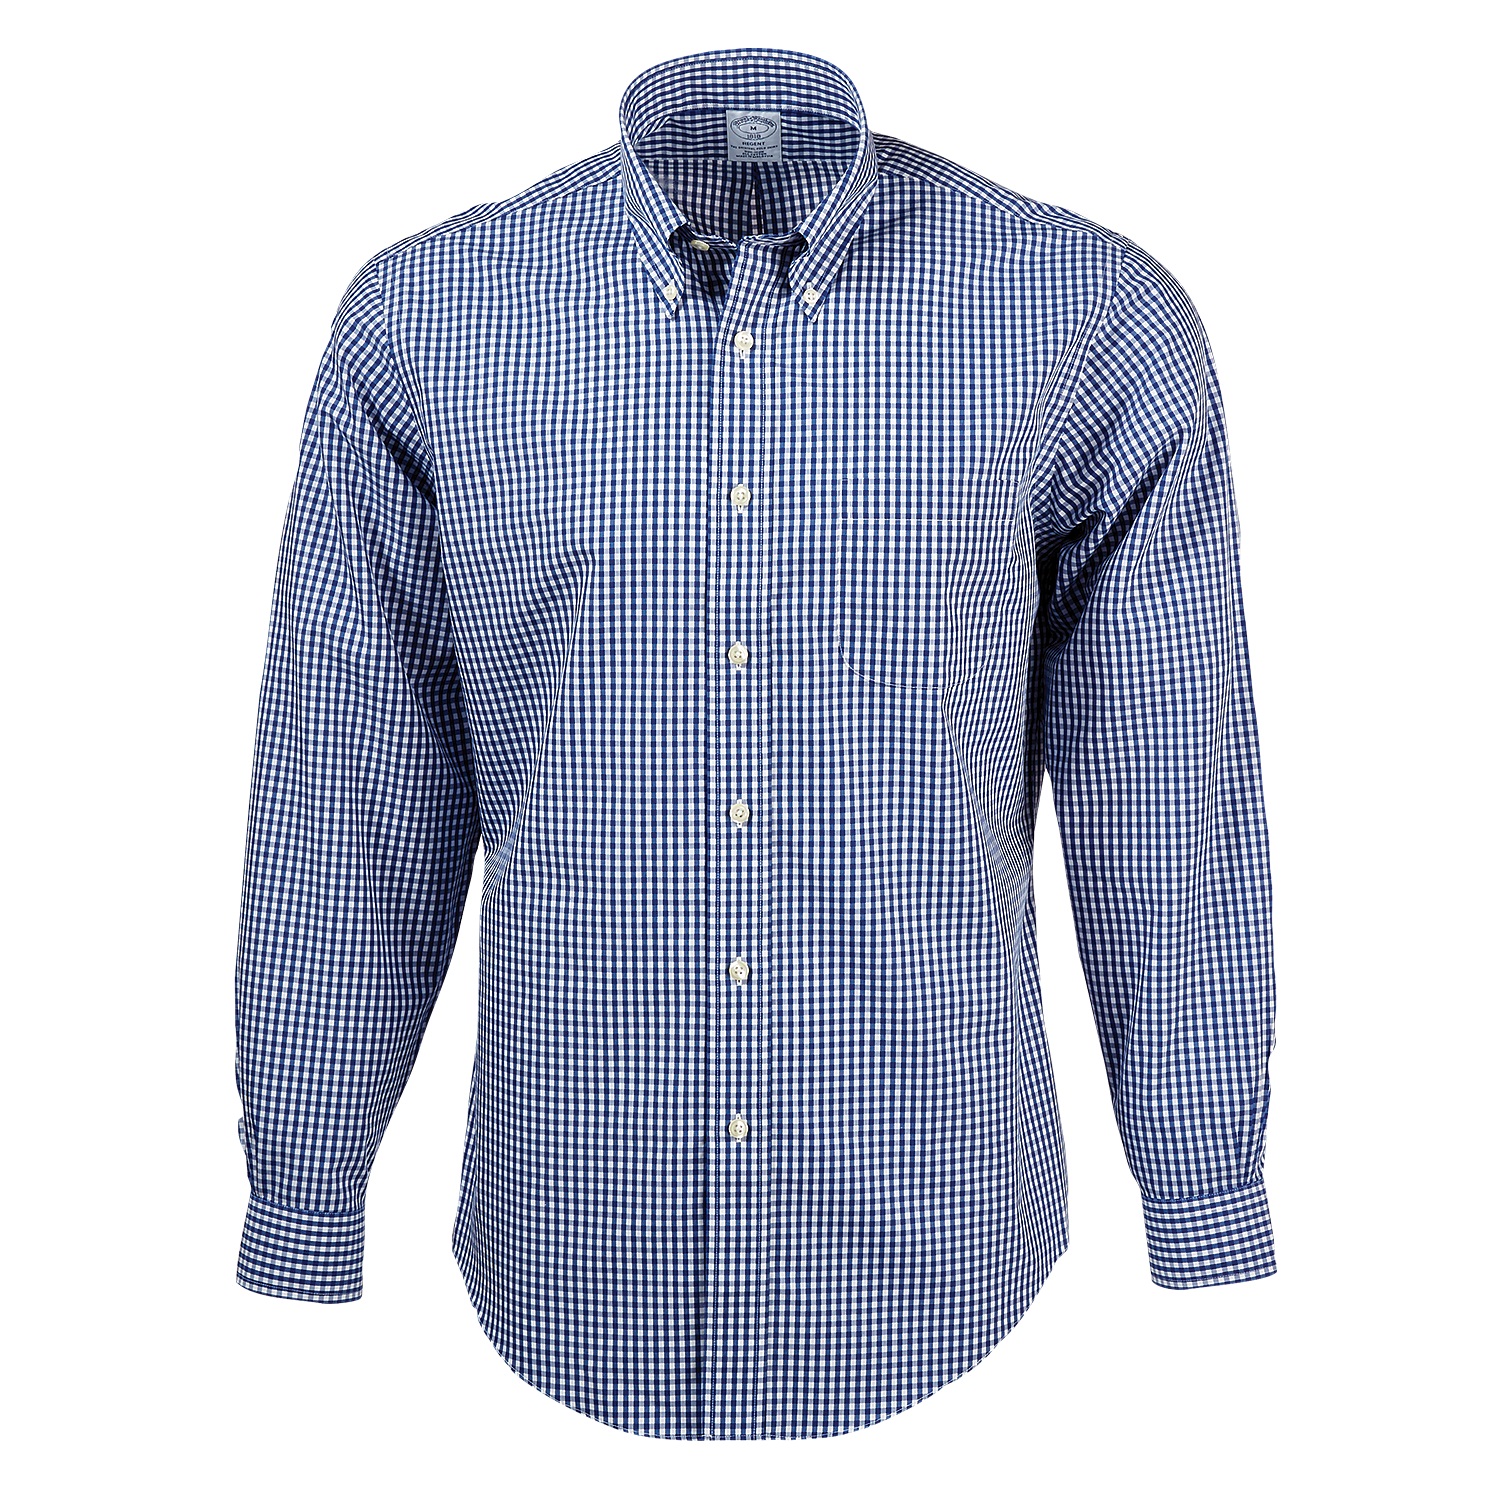 Brooks Brothers BR0731 - Men's Madison Fit Non-Iron Gingham Sport Shirt